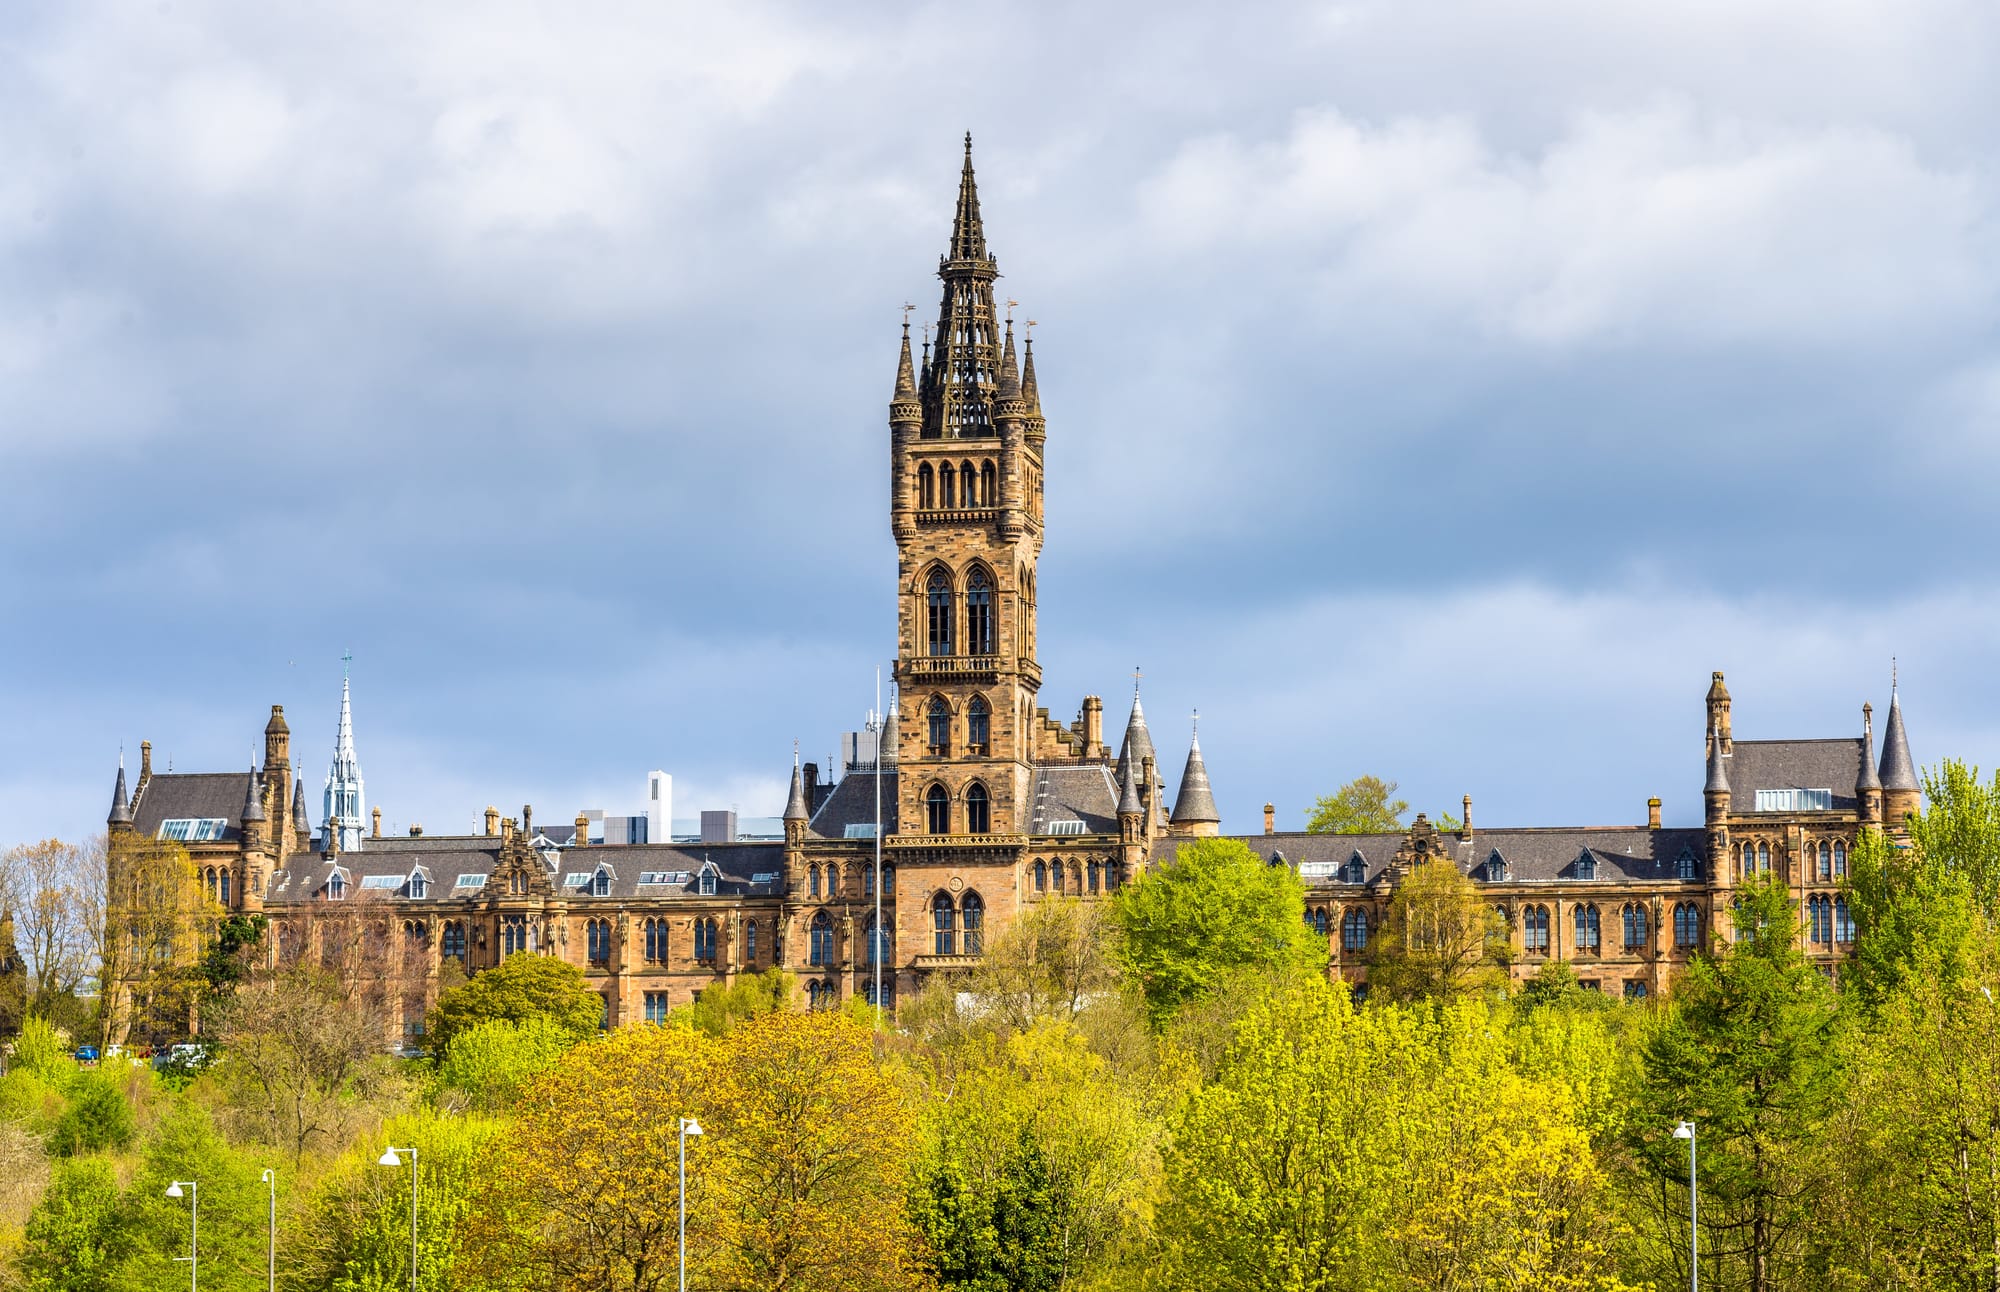 21 Free Things To Do In Glasgow For A Budget-Friendly Trip To Scotland's Friendliest City